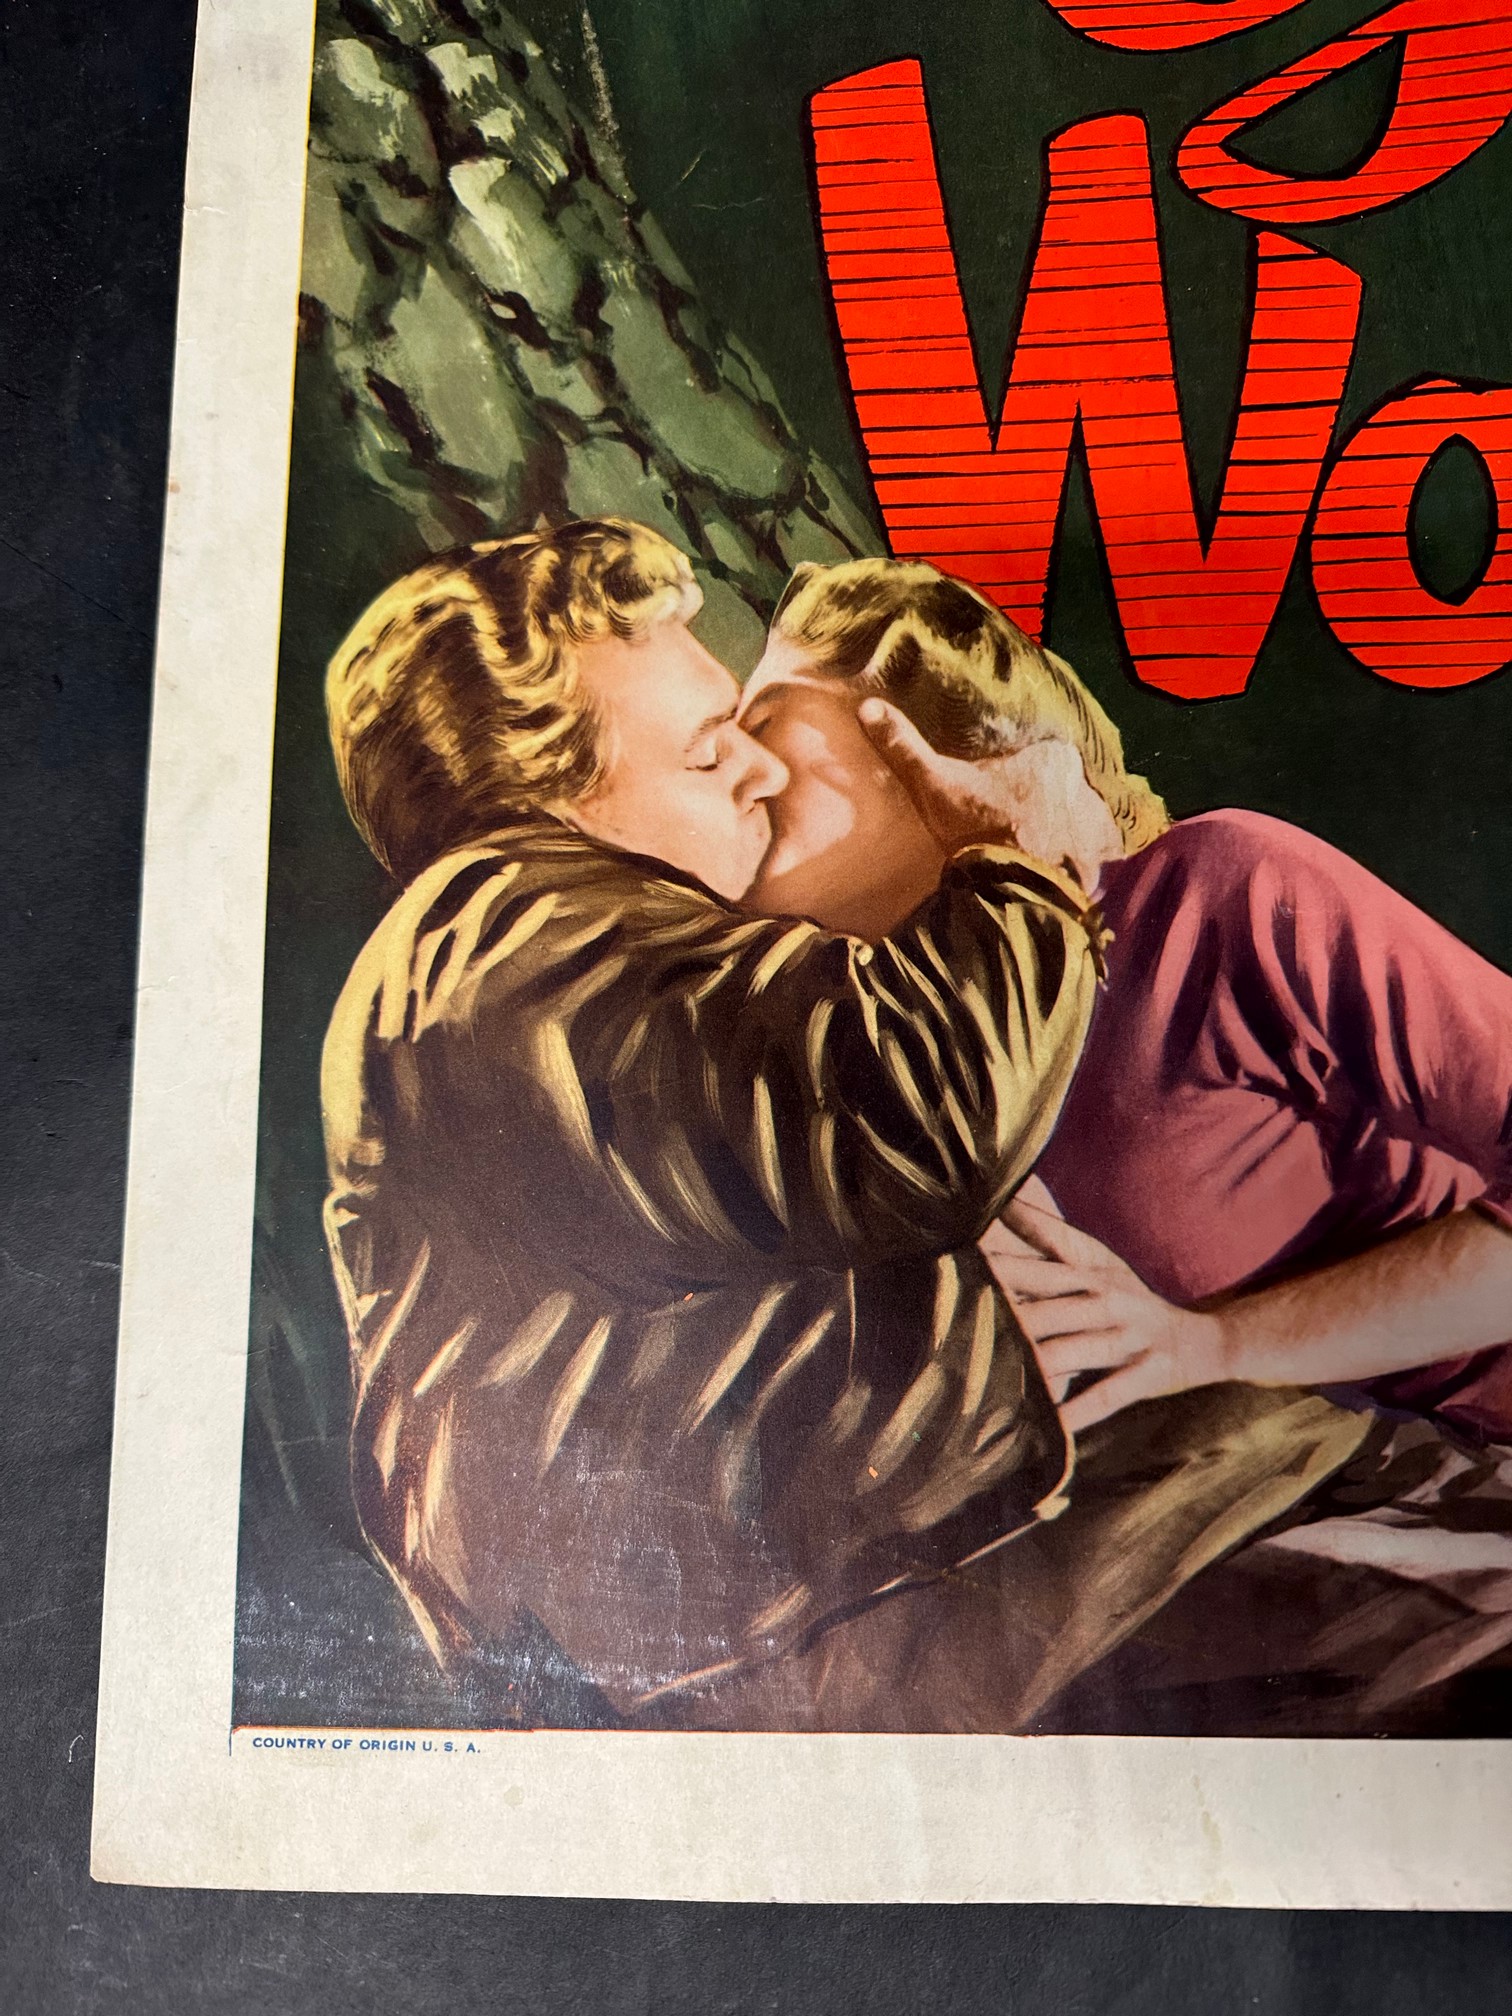 An original USA film poster for AB-PT's Girls in The Woods starring Forrest Tucker, Maggie Hayes, - Image 4 of 11